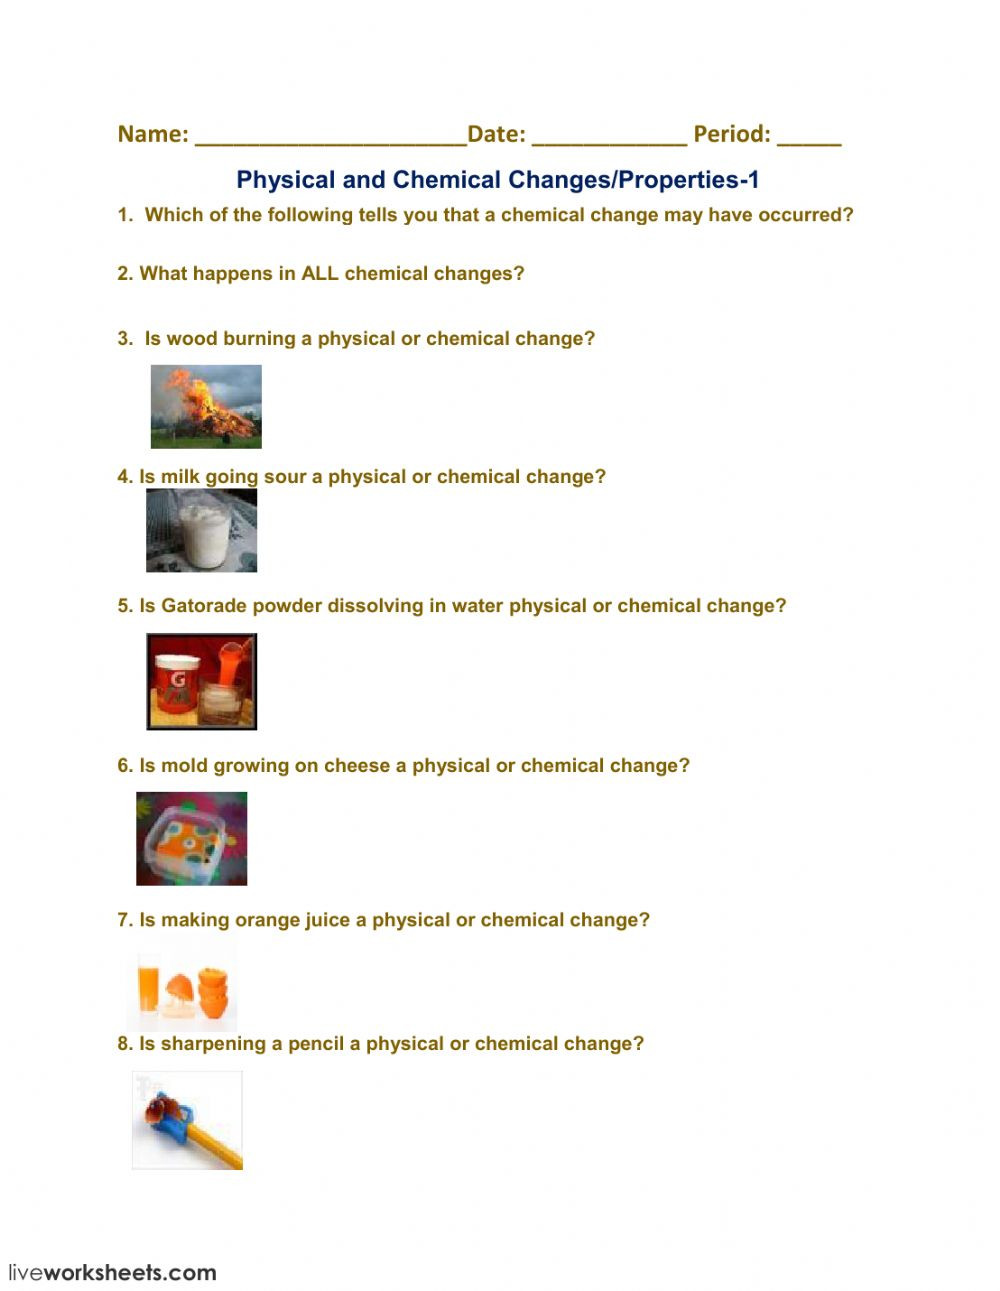 Physical and Chemical Changes Worksheet Physical and Chemical Changes Properties 1 Interactive